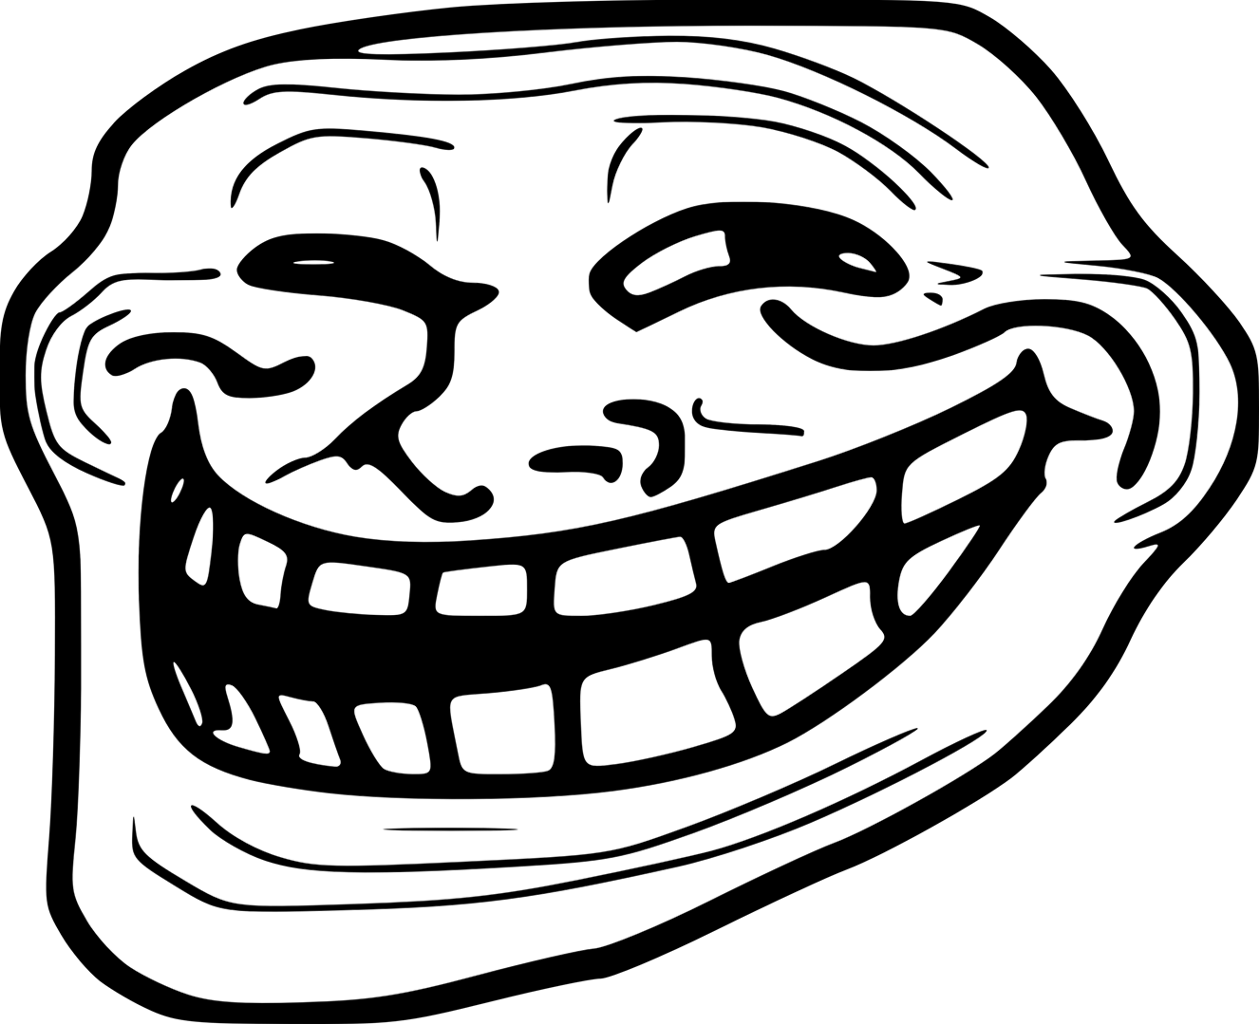 Galeria - 1259px-Troll_Face.png